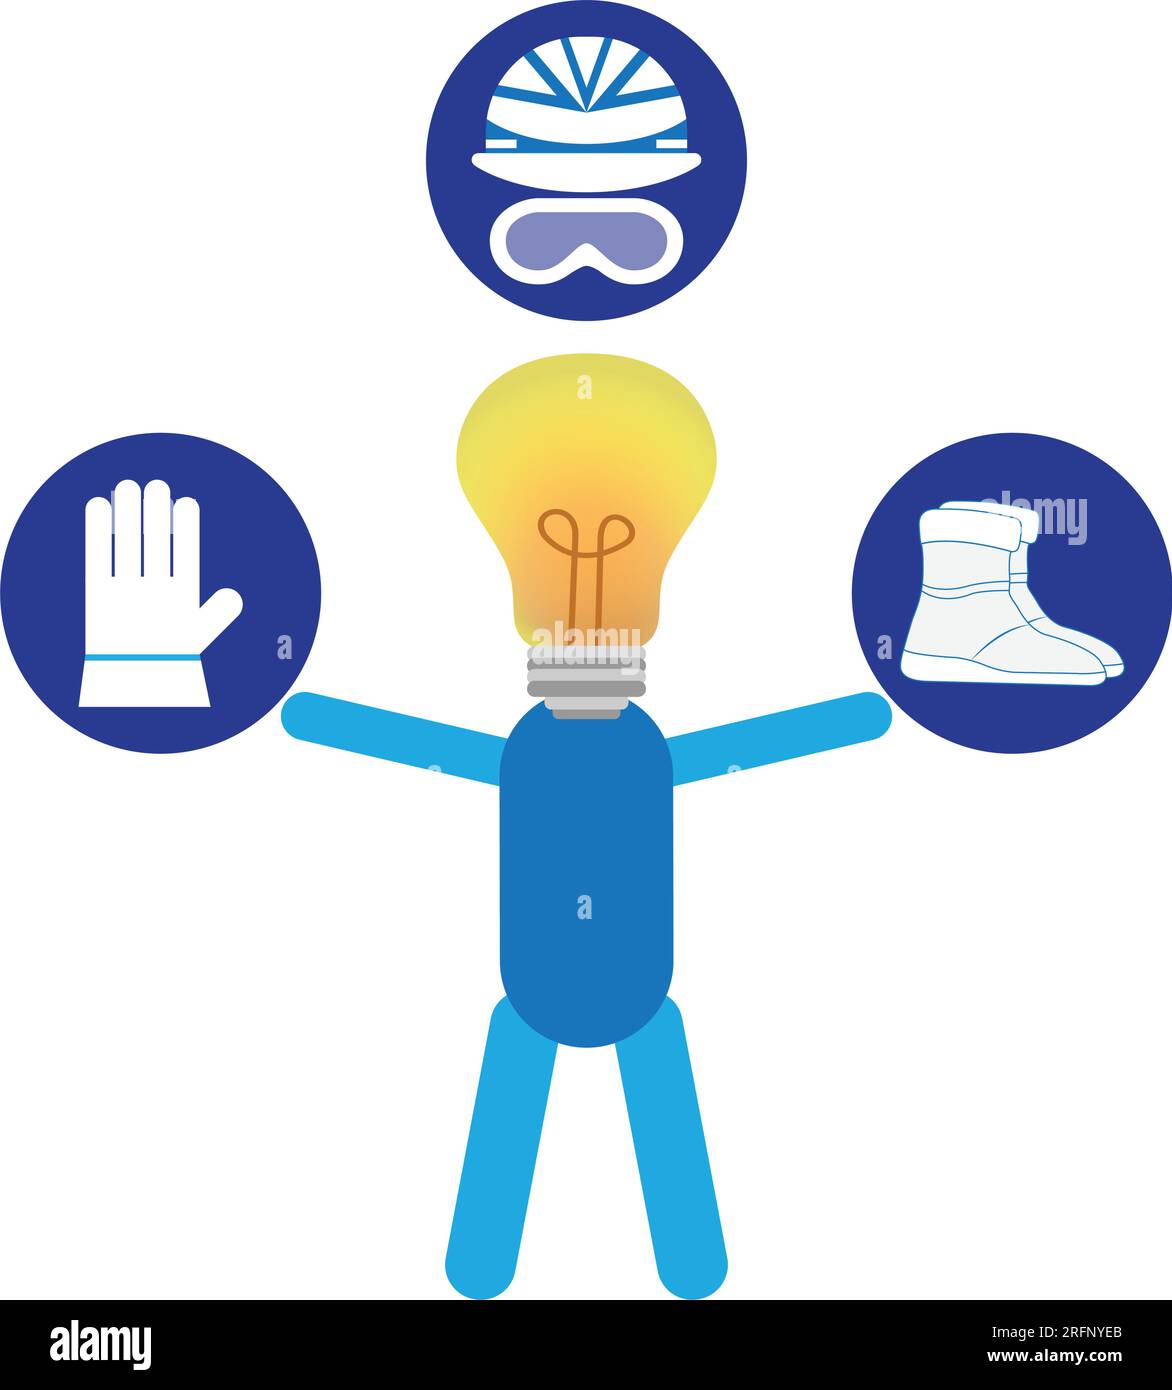 Silhouette of a person with light bulb instead of head and holding icons of safety work equipment Stock Vector